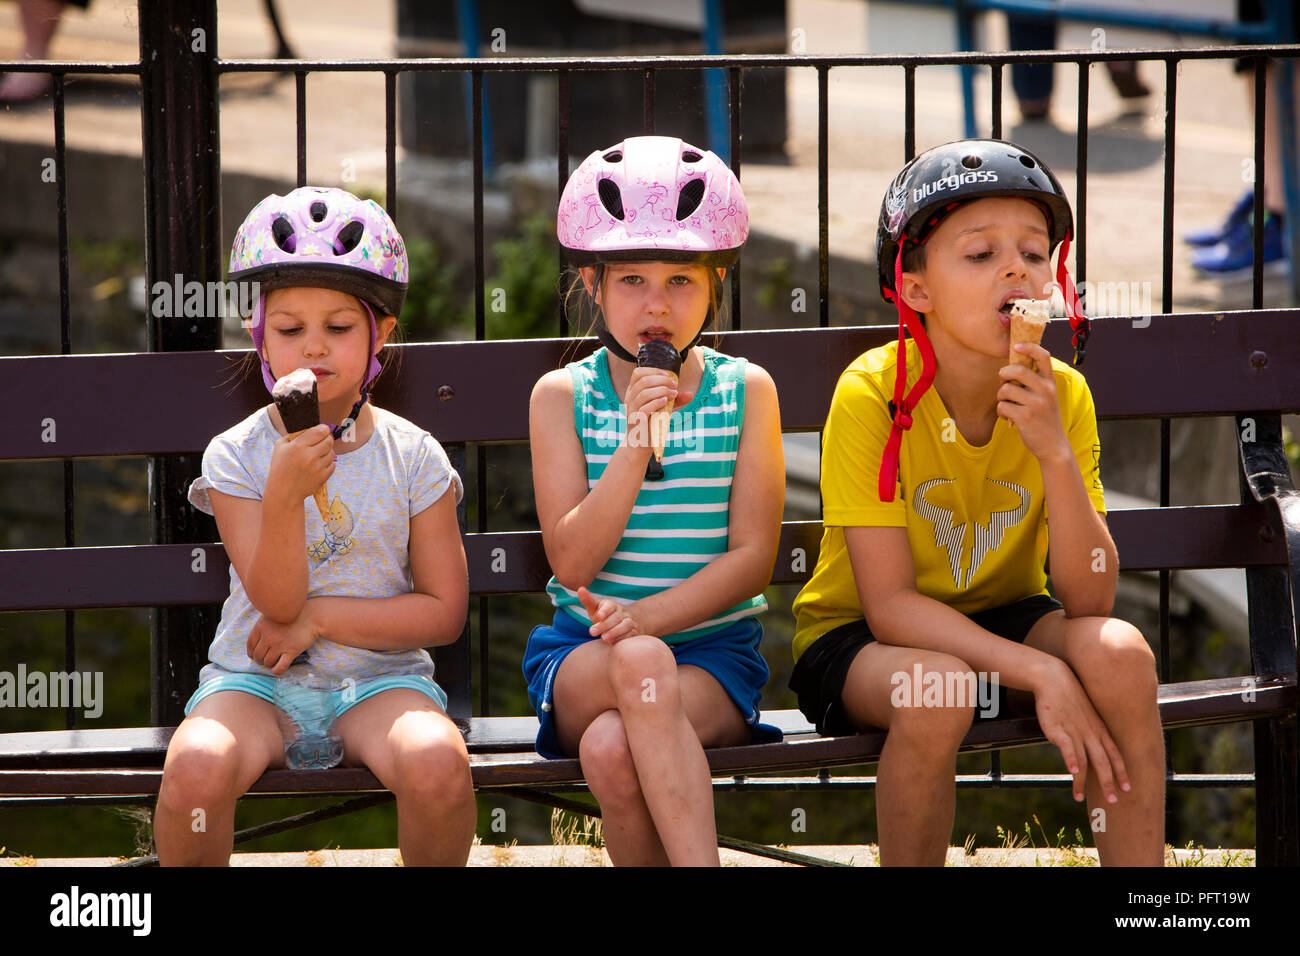 UK, Cornwall, Padstow, The Strand, young chidren wearing bicycle helmets eating ice creams in sunshine Stock Photo